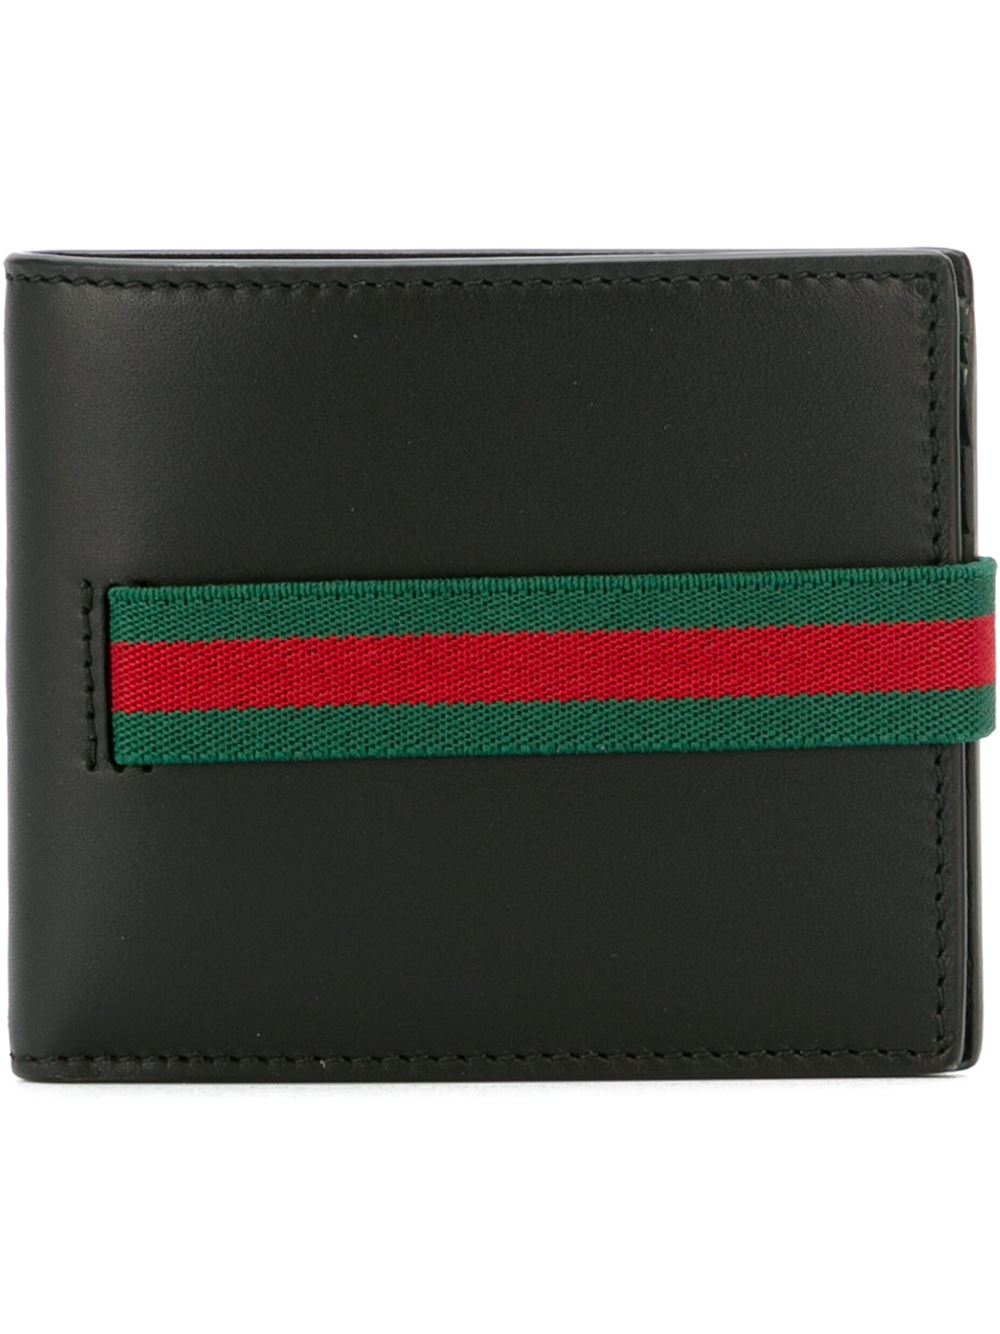 Gucci Elastic Wallet in Red for Men - Lyst